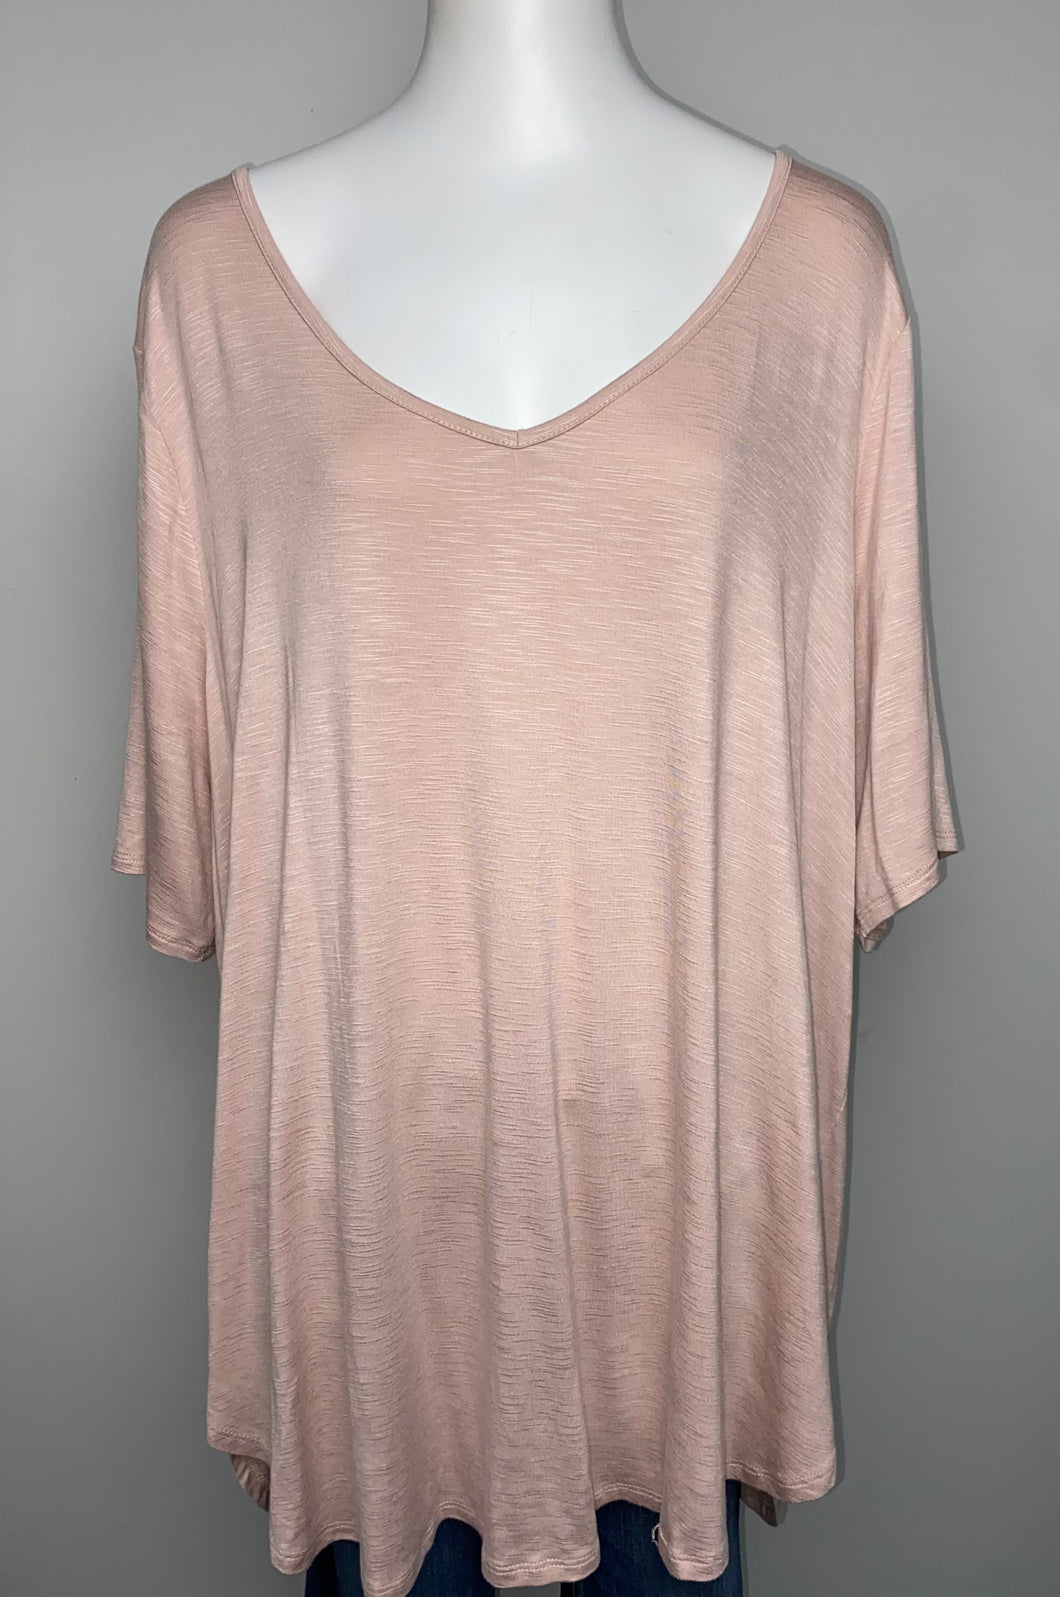 Maurices 24/7 Tee NEW!- (3X)